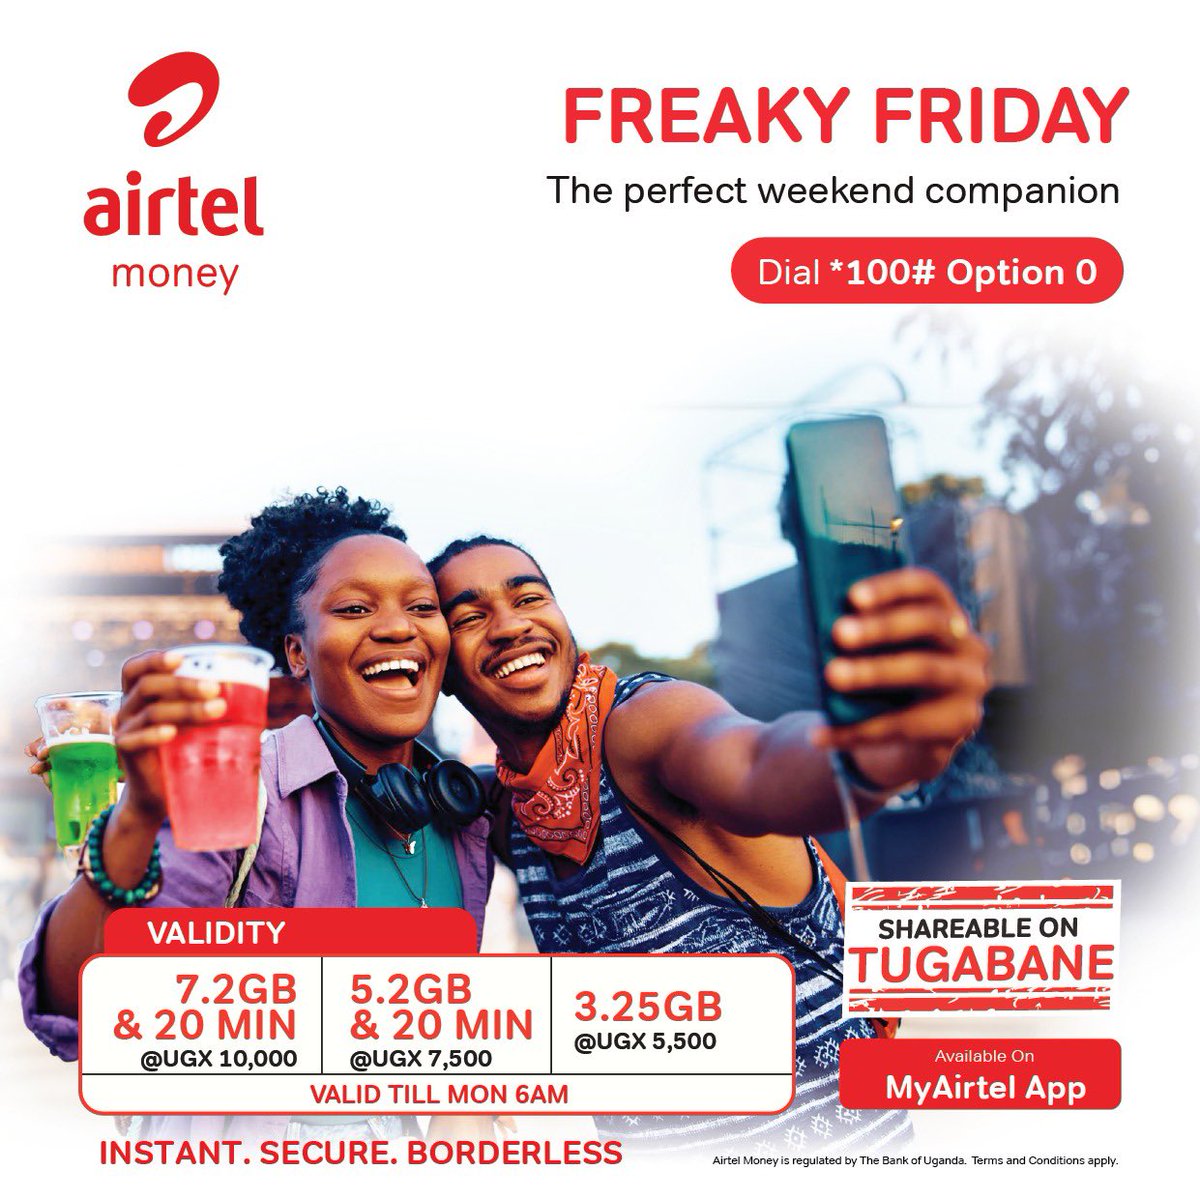 Tusimbudde ne #FreakyFriday 🔥
Dial *100# and select option 0 or use #MyAirtelApp 
airtelafrica.onelink.me/cGyr/qgj4qeu2 to get your weekrnd started